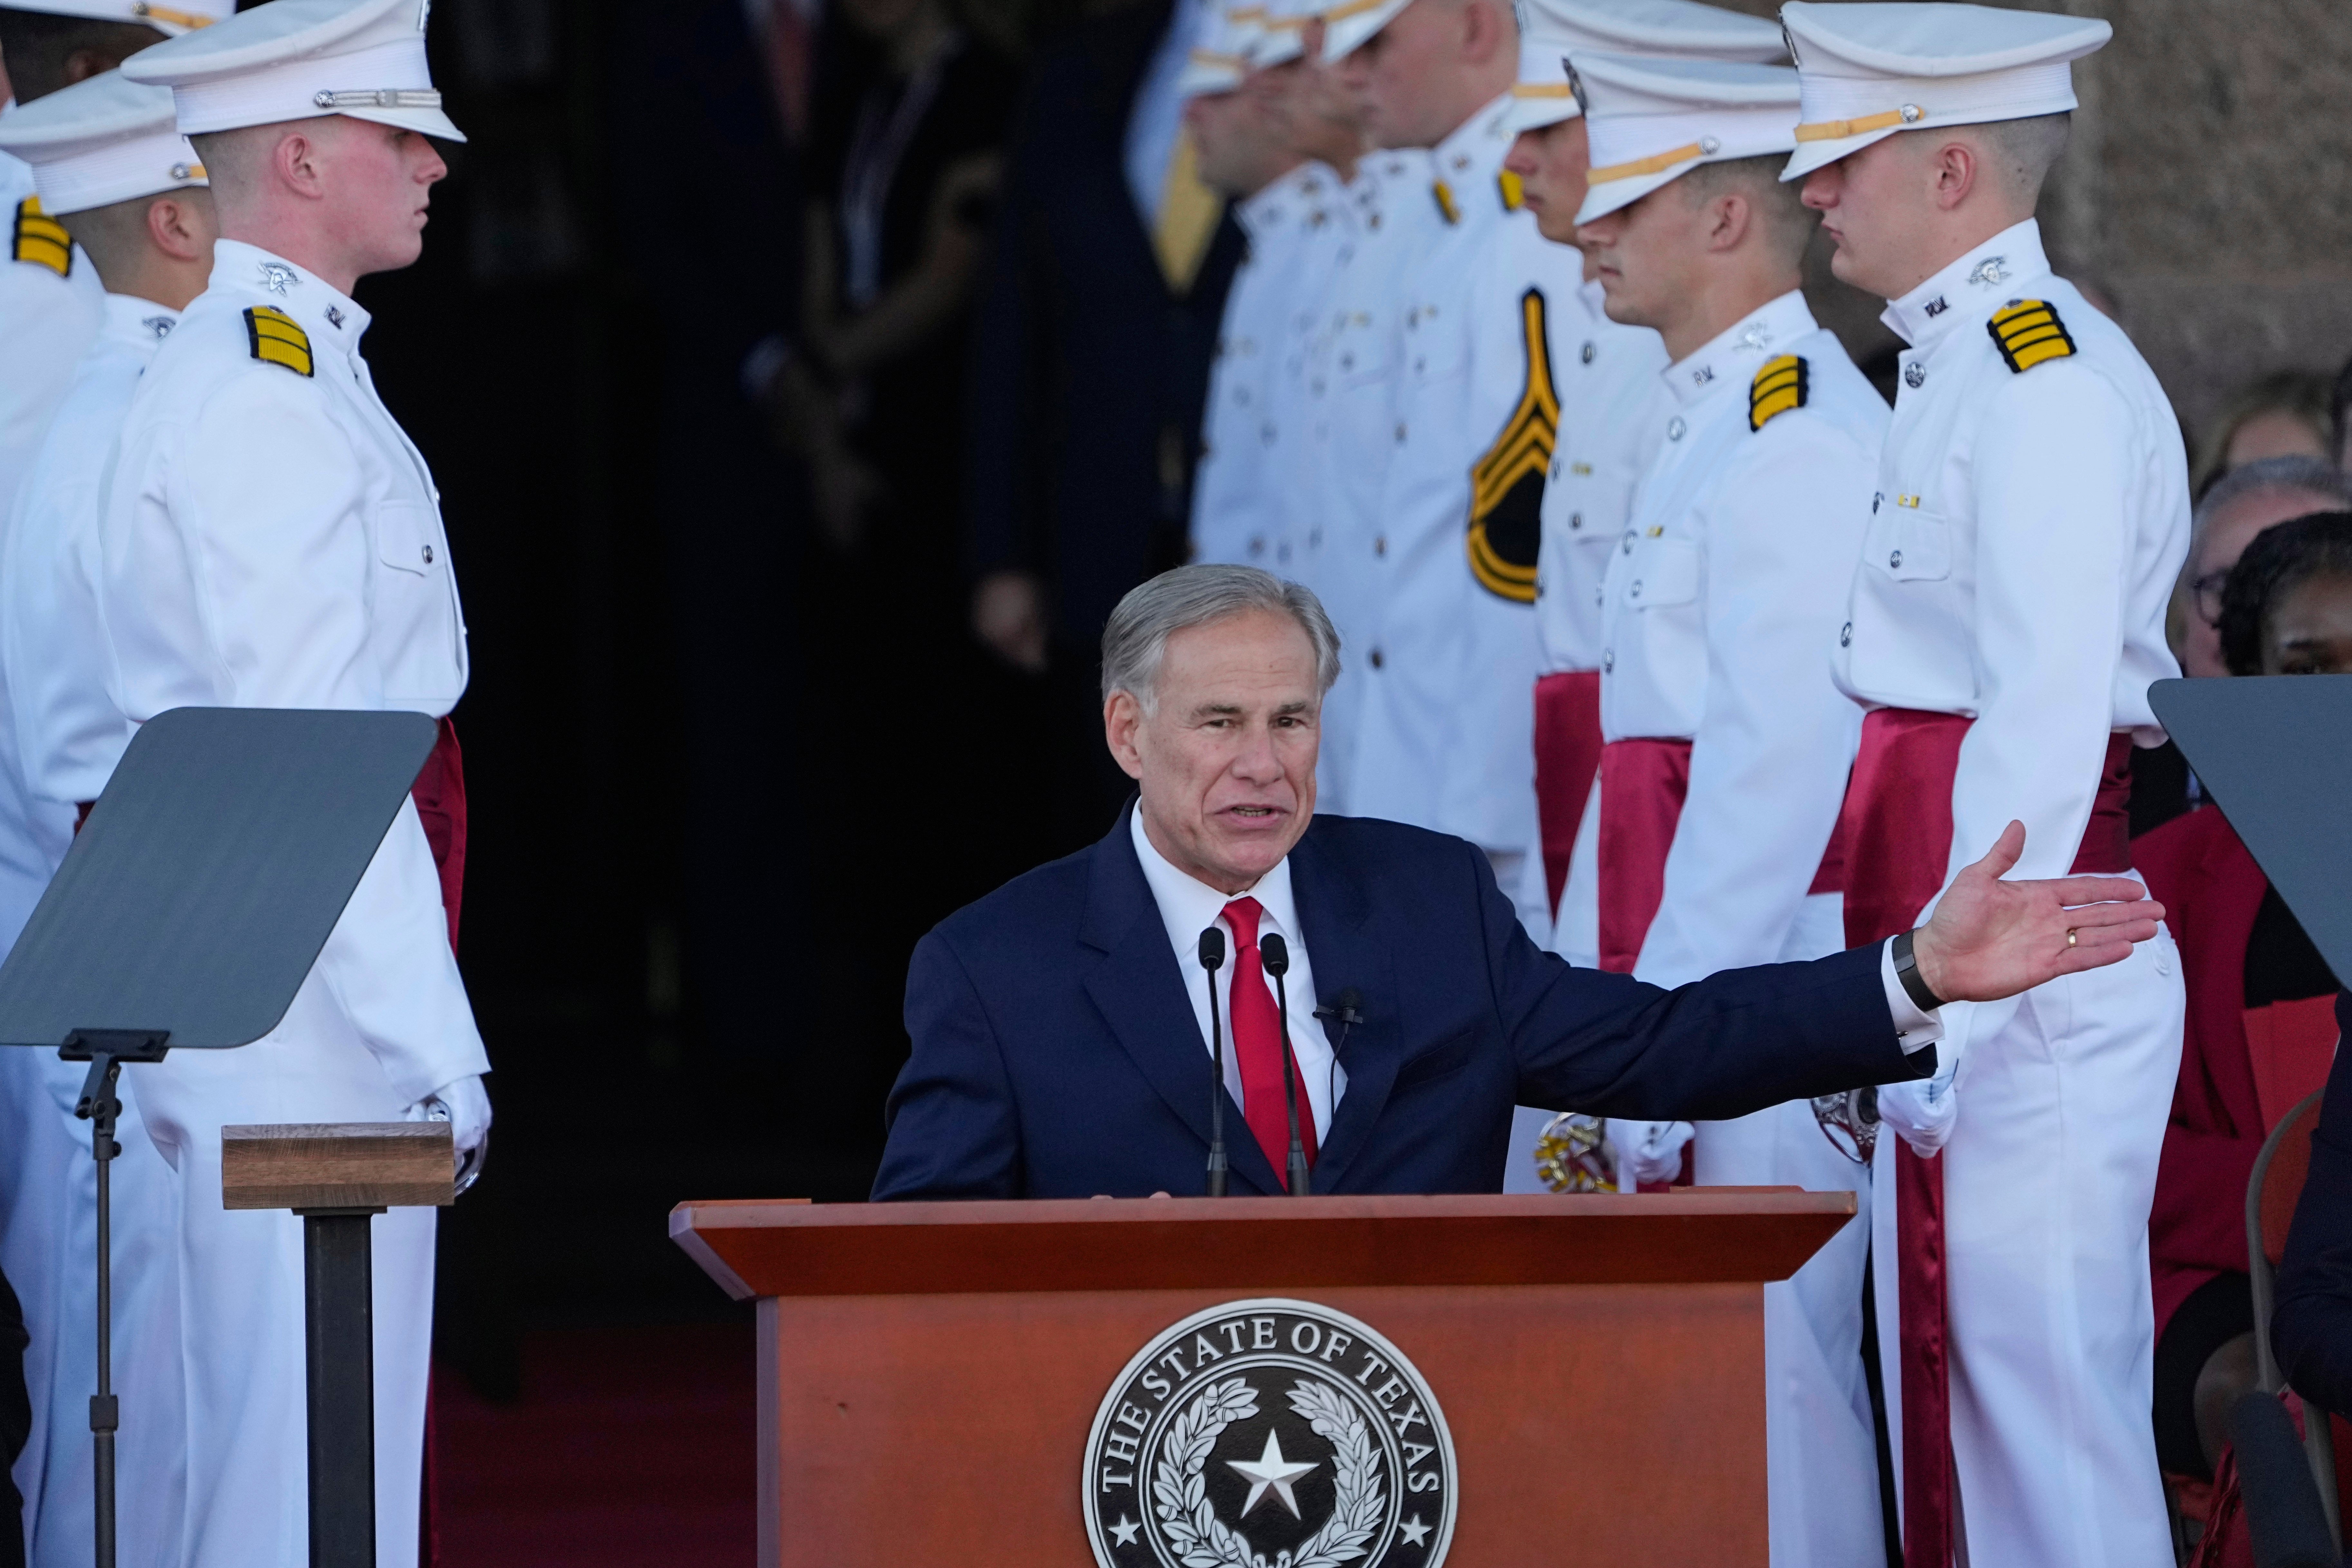 Texas State of the State